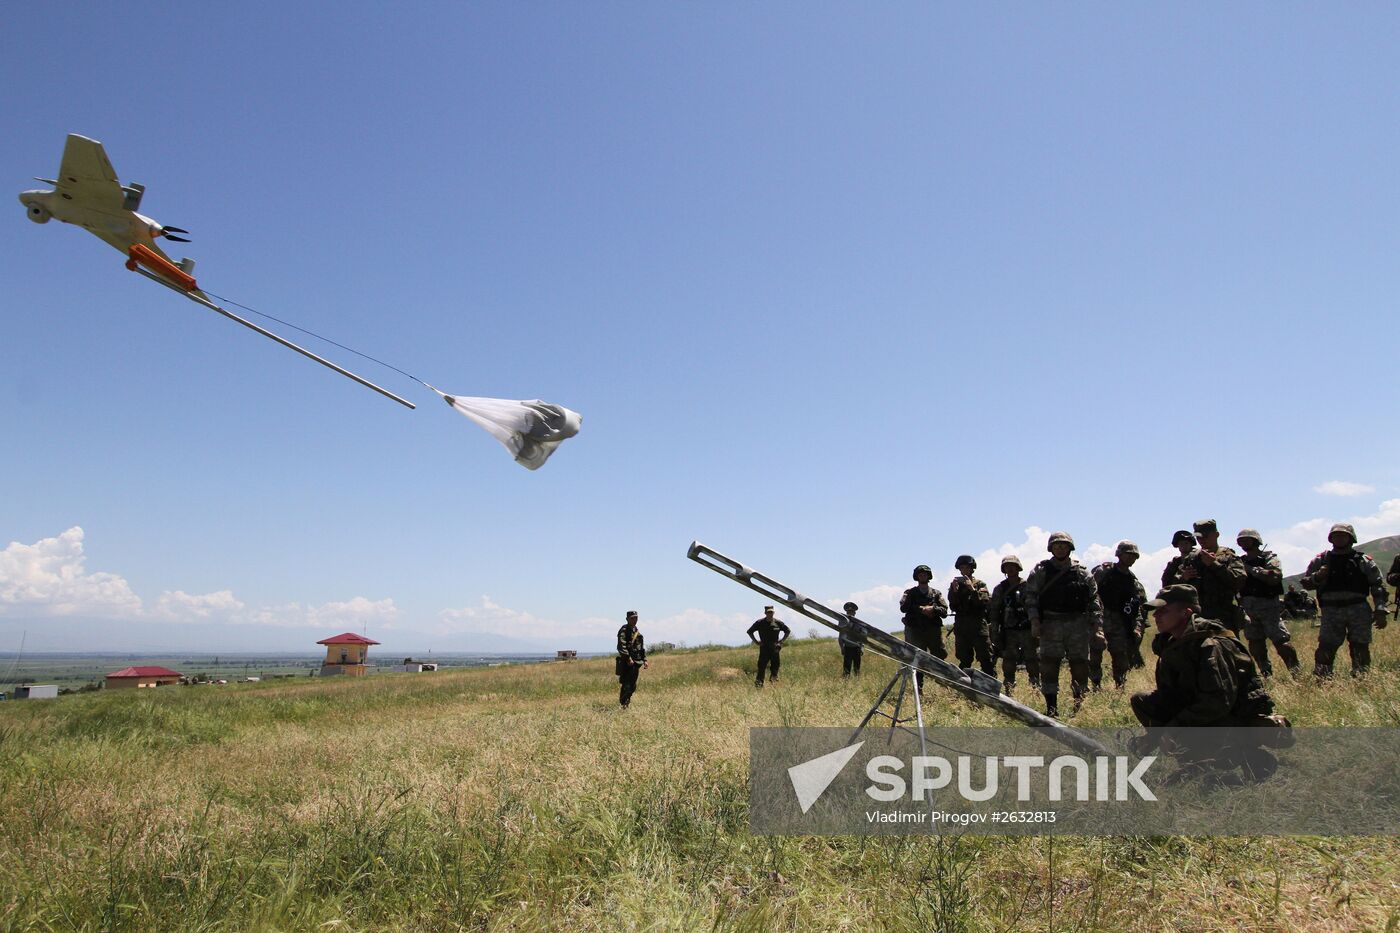 Joint exercises by Russian Airborne Forces and Kyrgyz National Guards